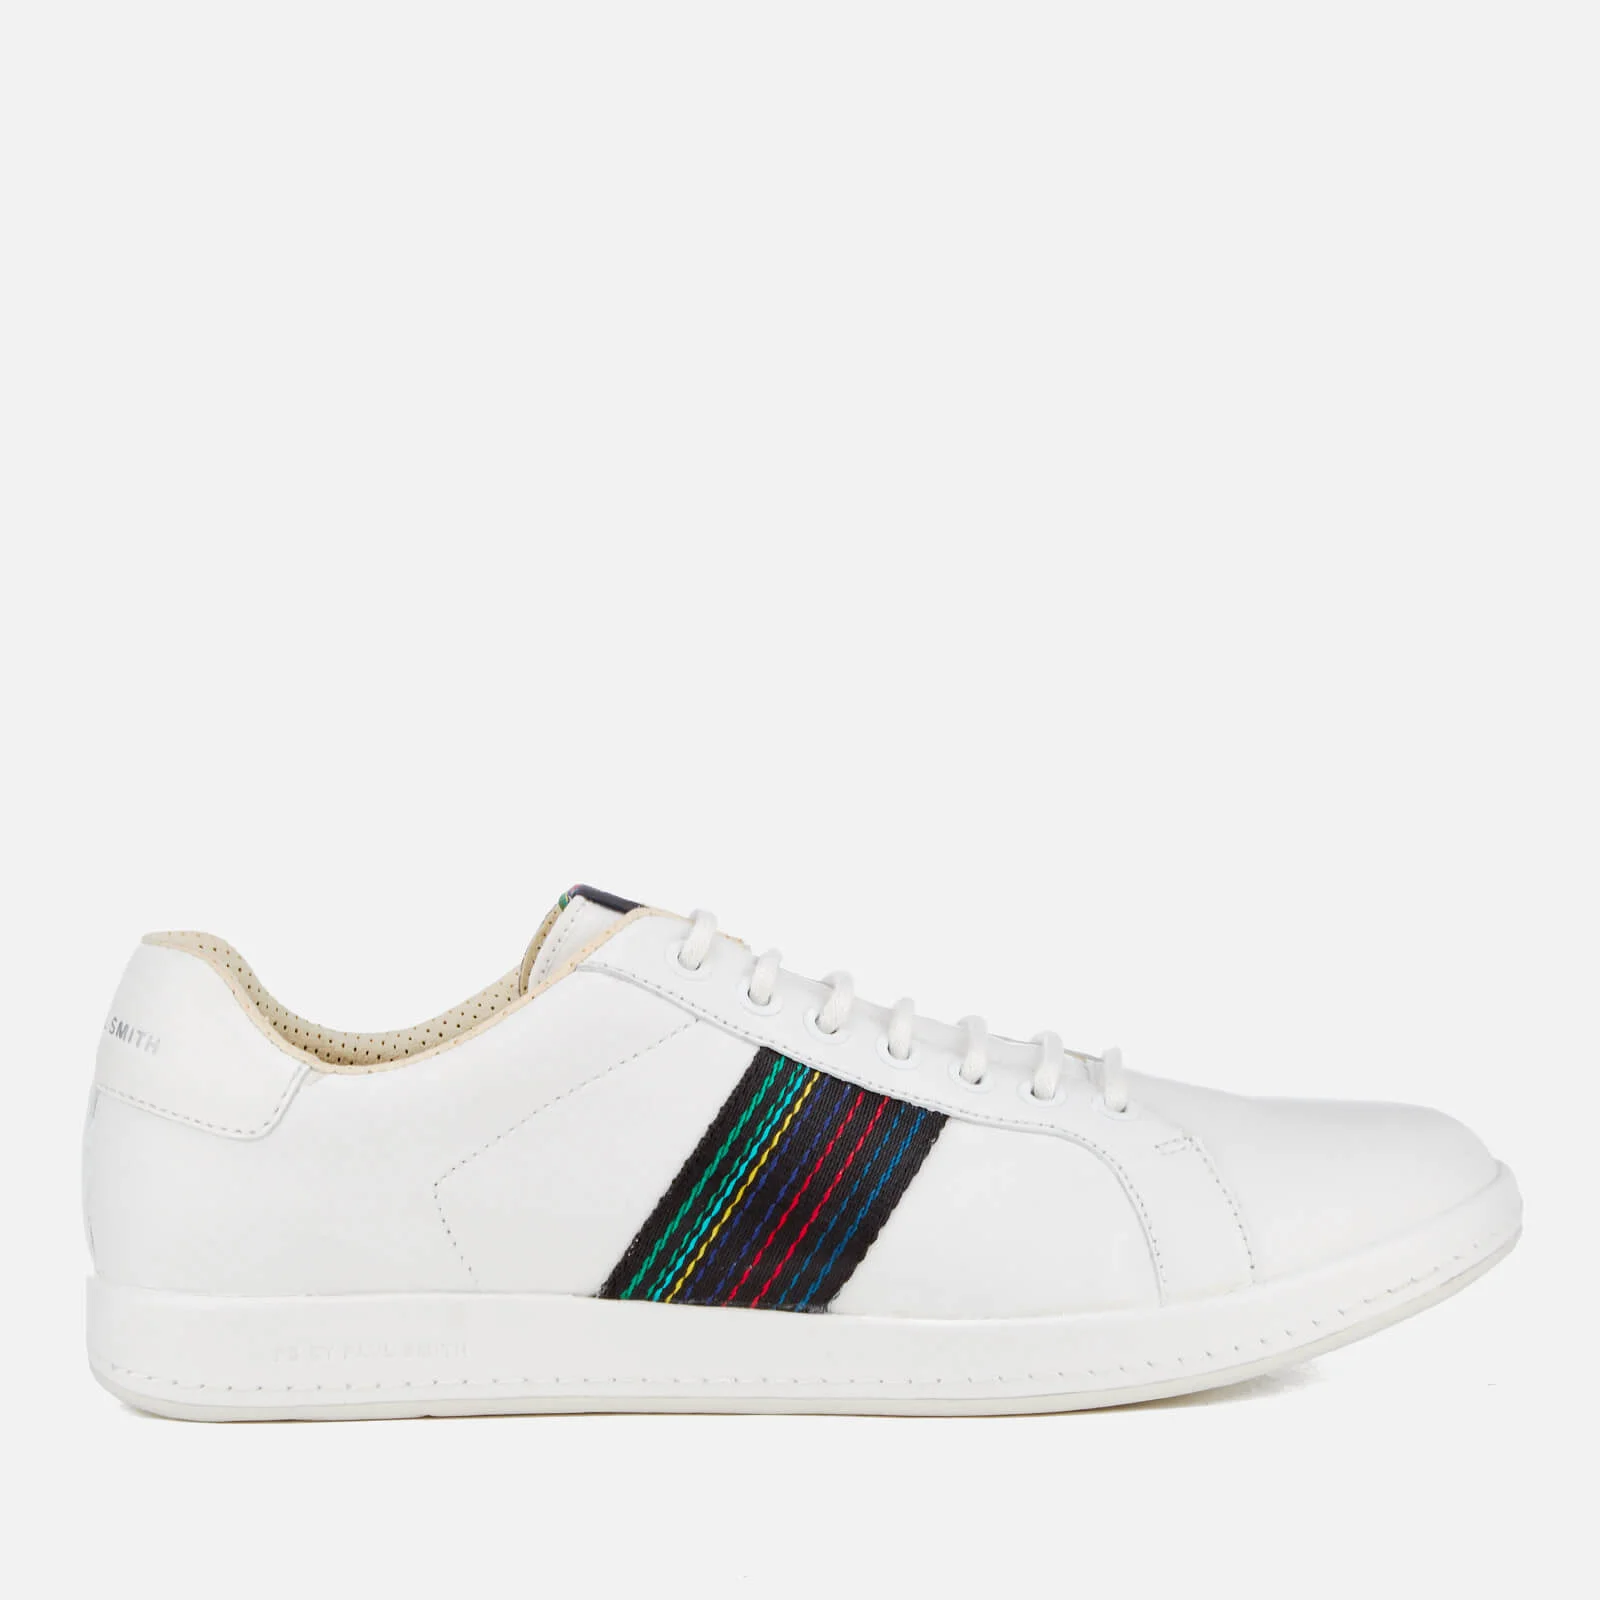 PS by Paul Smith Men's Lapin Leather Trainers - White Image 1